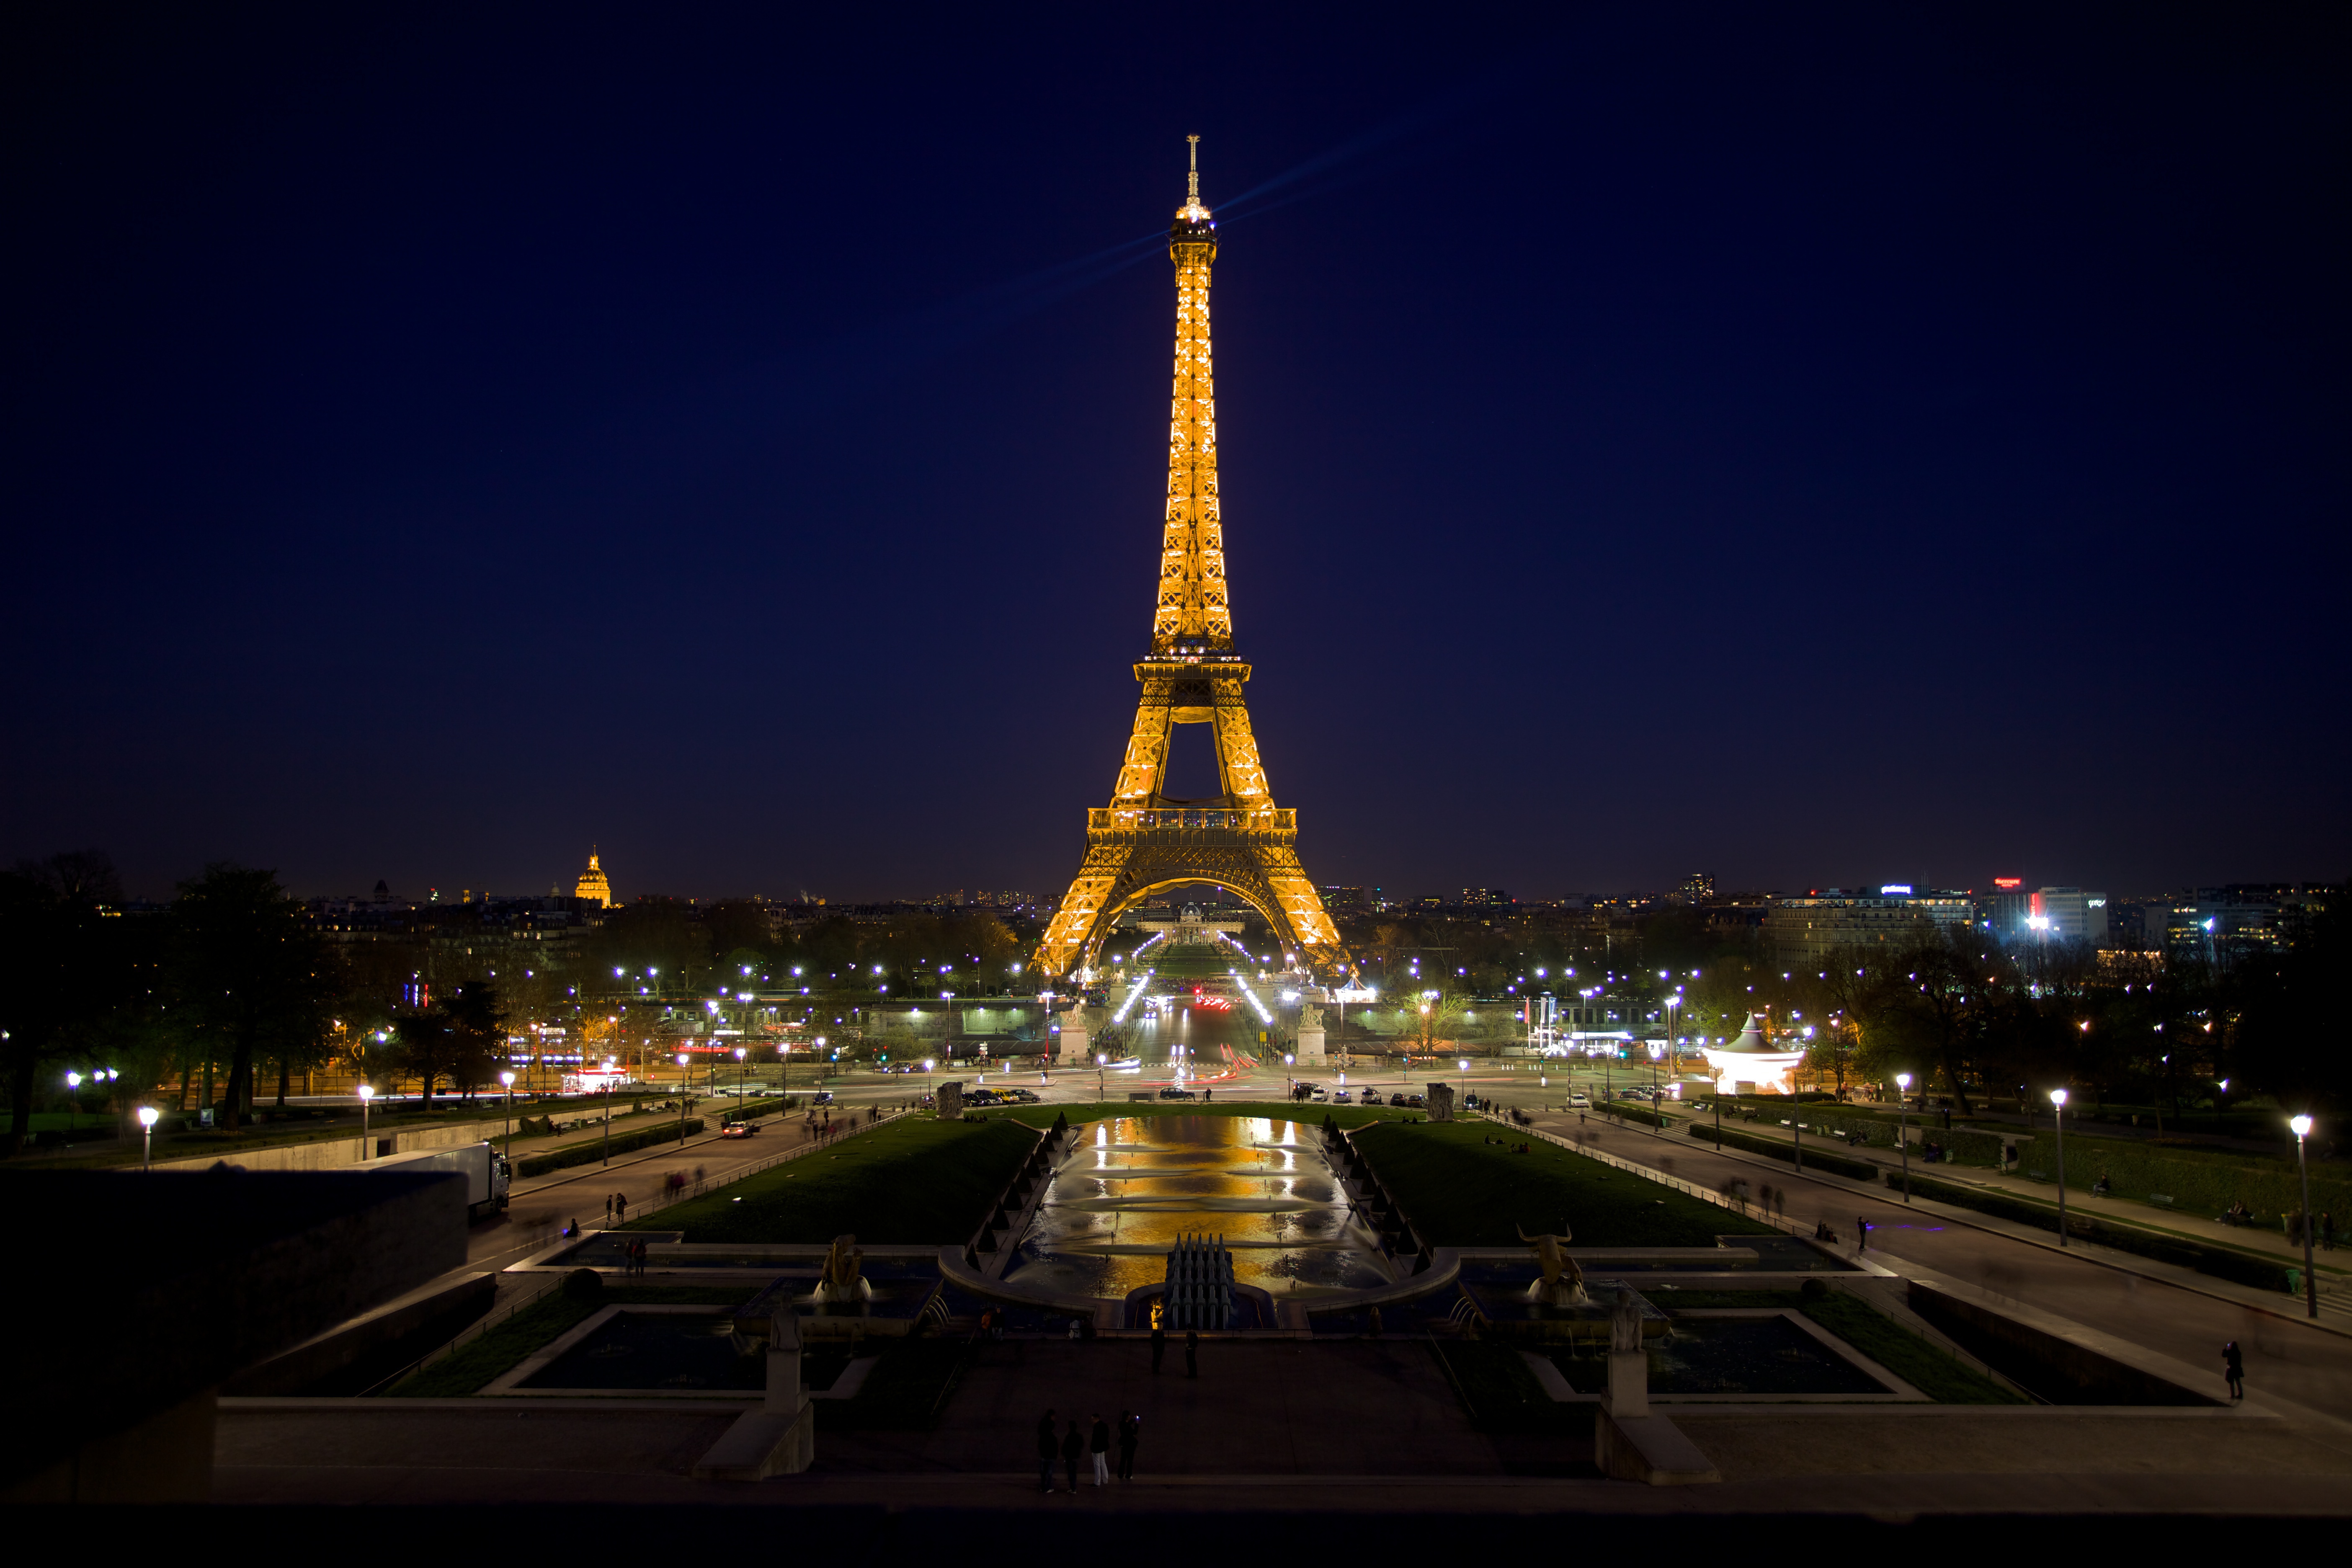 Eiffel Tower Wallpapers Images Photos Pictures Backgrounds